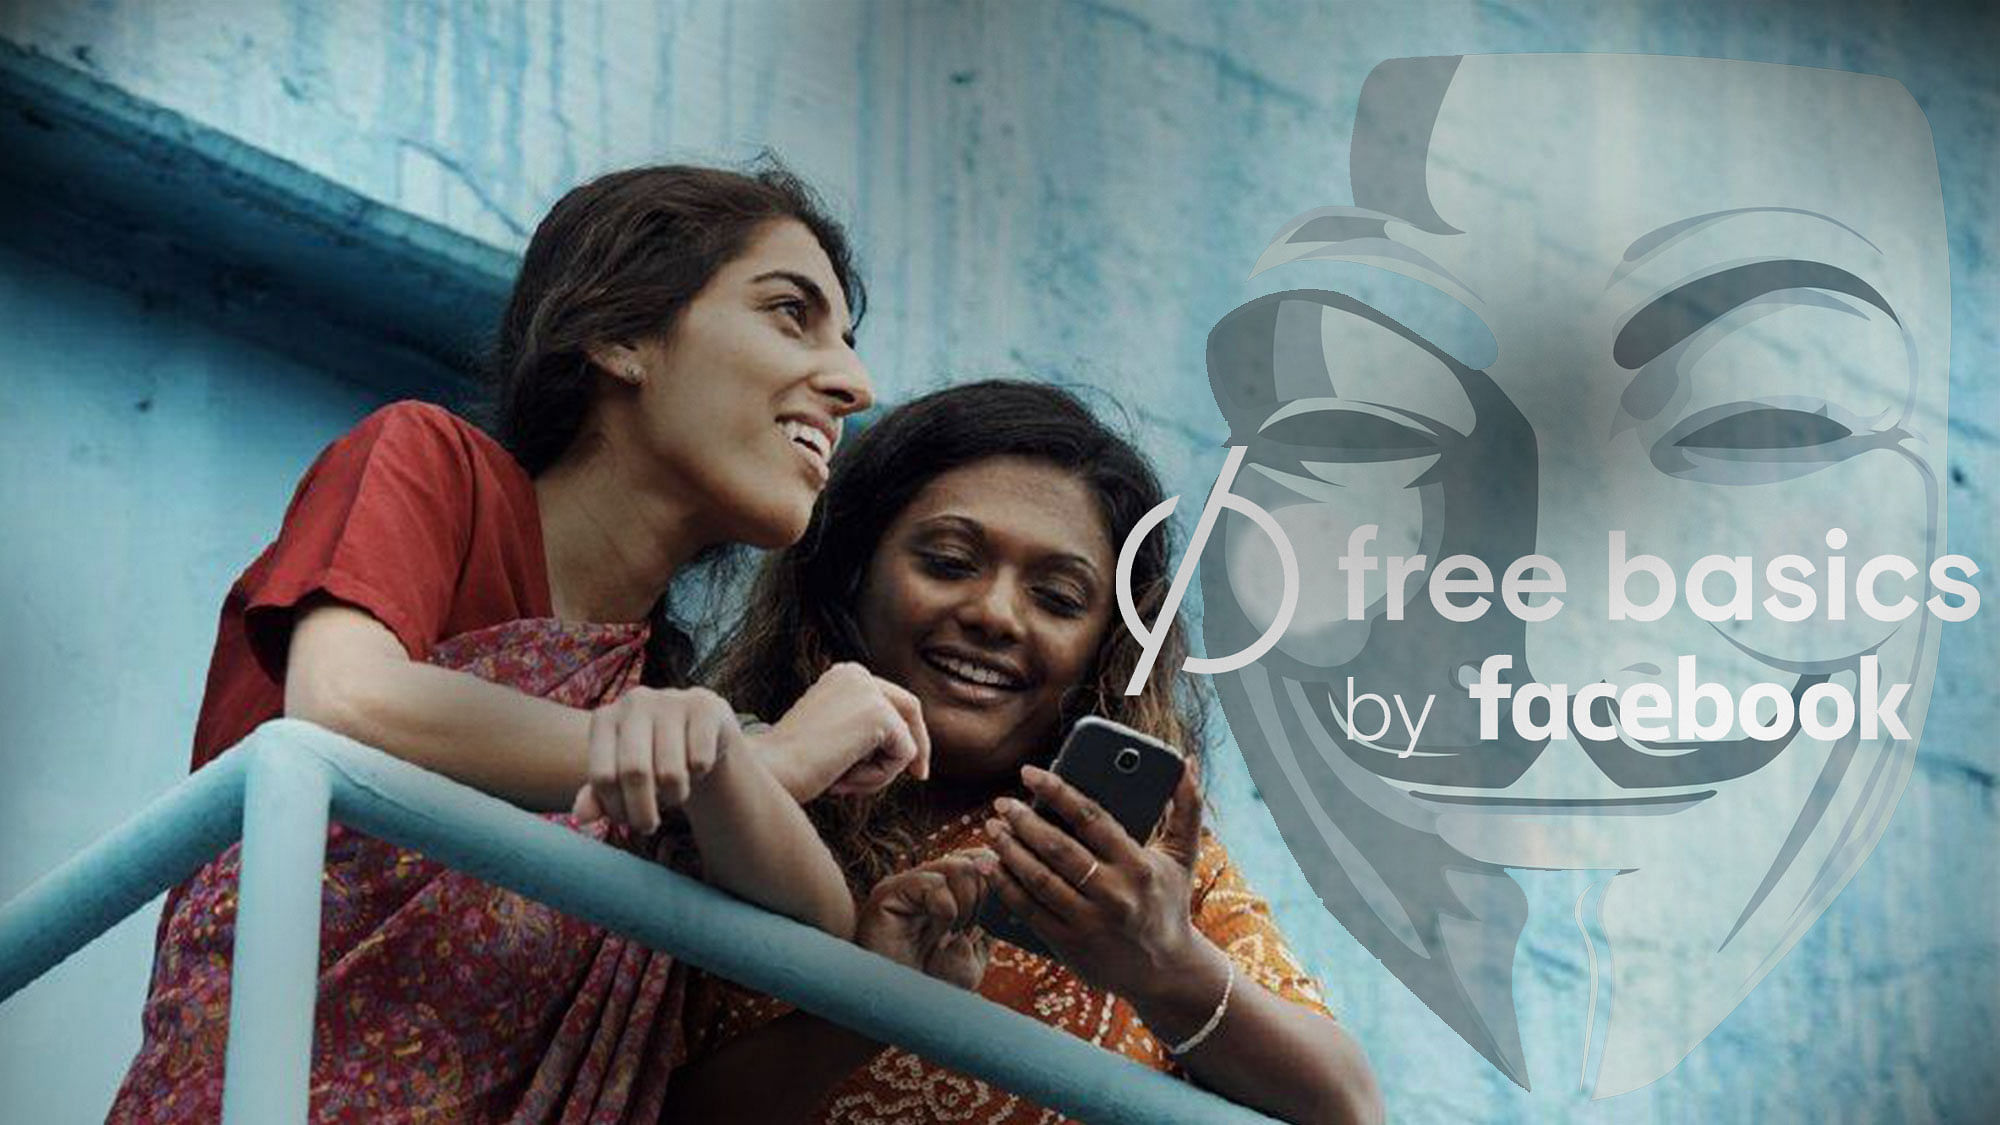 Facebook’s Free Basics is Internet.org all over again. (Photo: <a href="https://www.facebook.com/internetdotorg.india/?fref=photo">Facebook</a>)